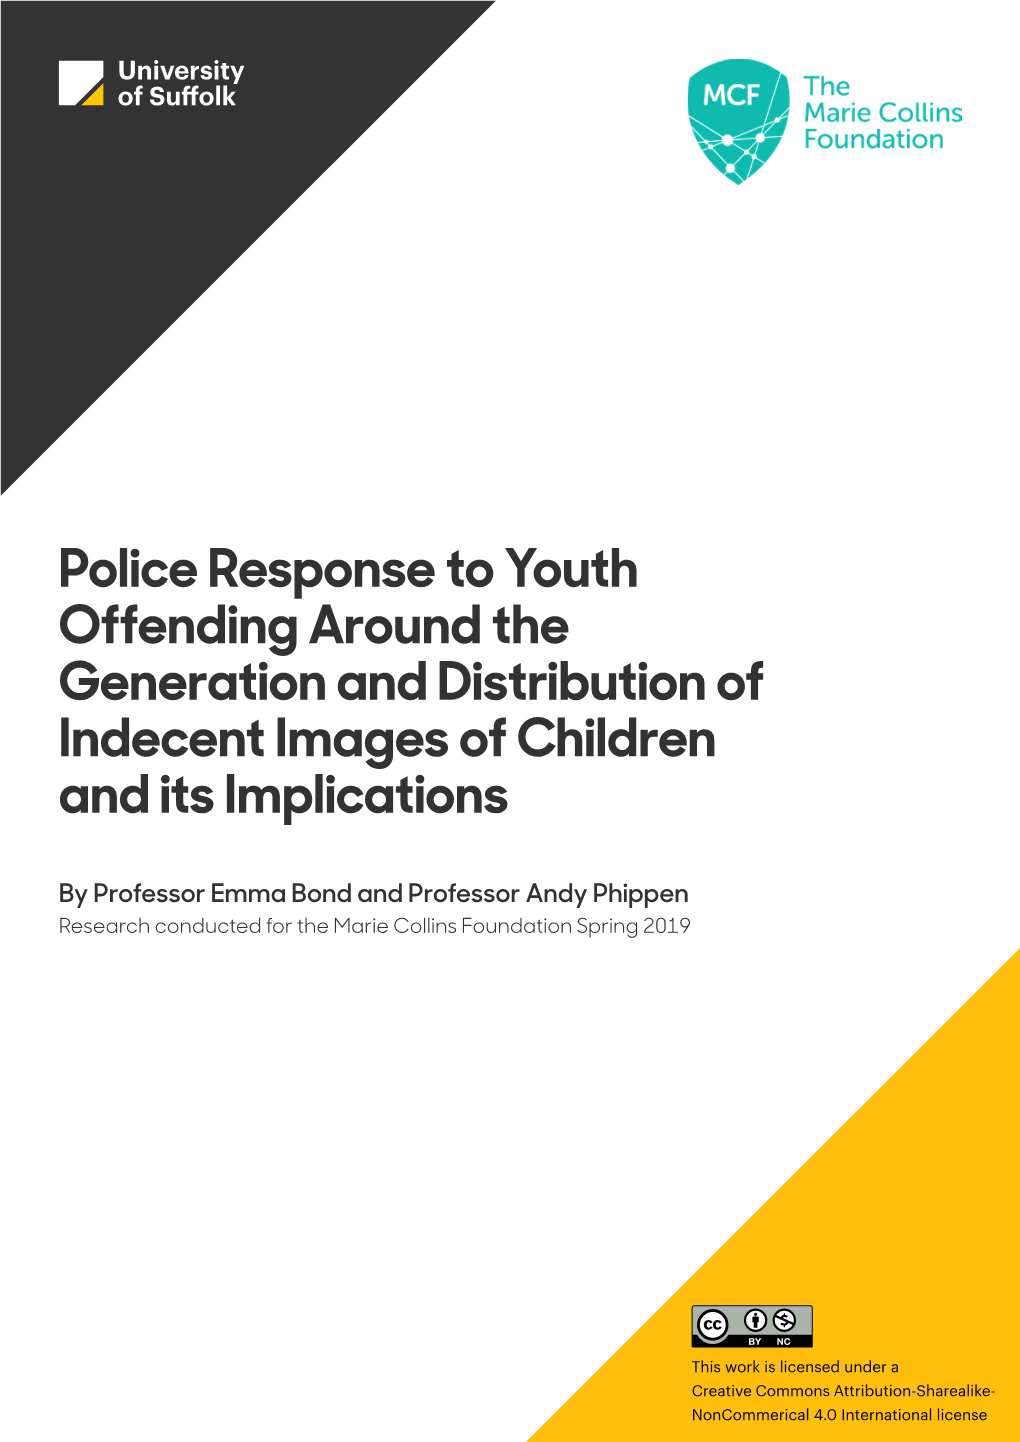 Police Response to Youth Offending Around the Generation and Distribution of Indecent Images of Children and Its Implications